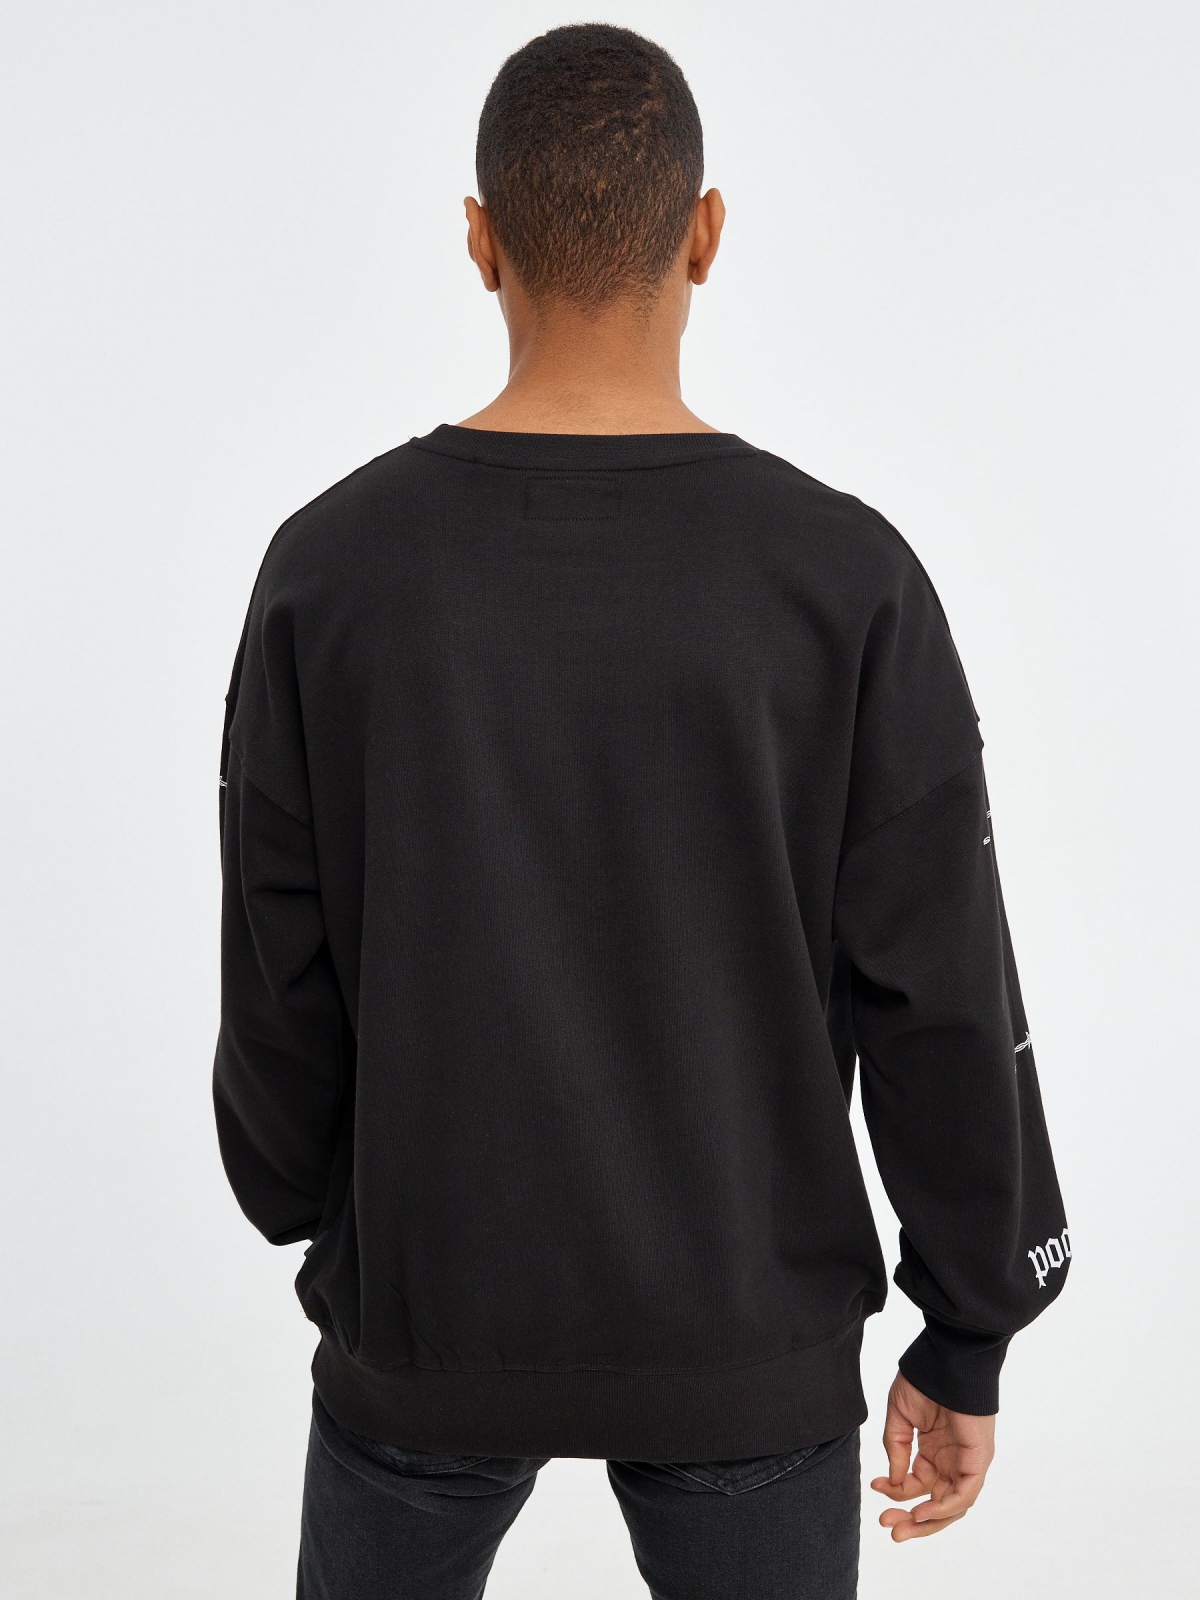 Hoodless sweatshirt with print black middle back view